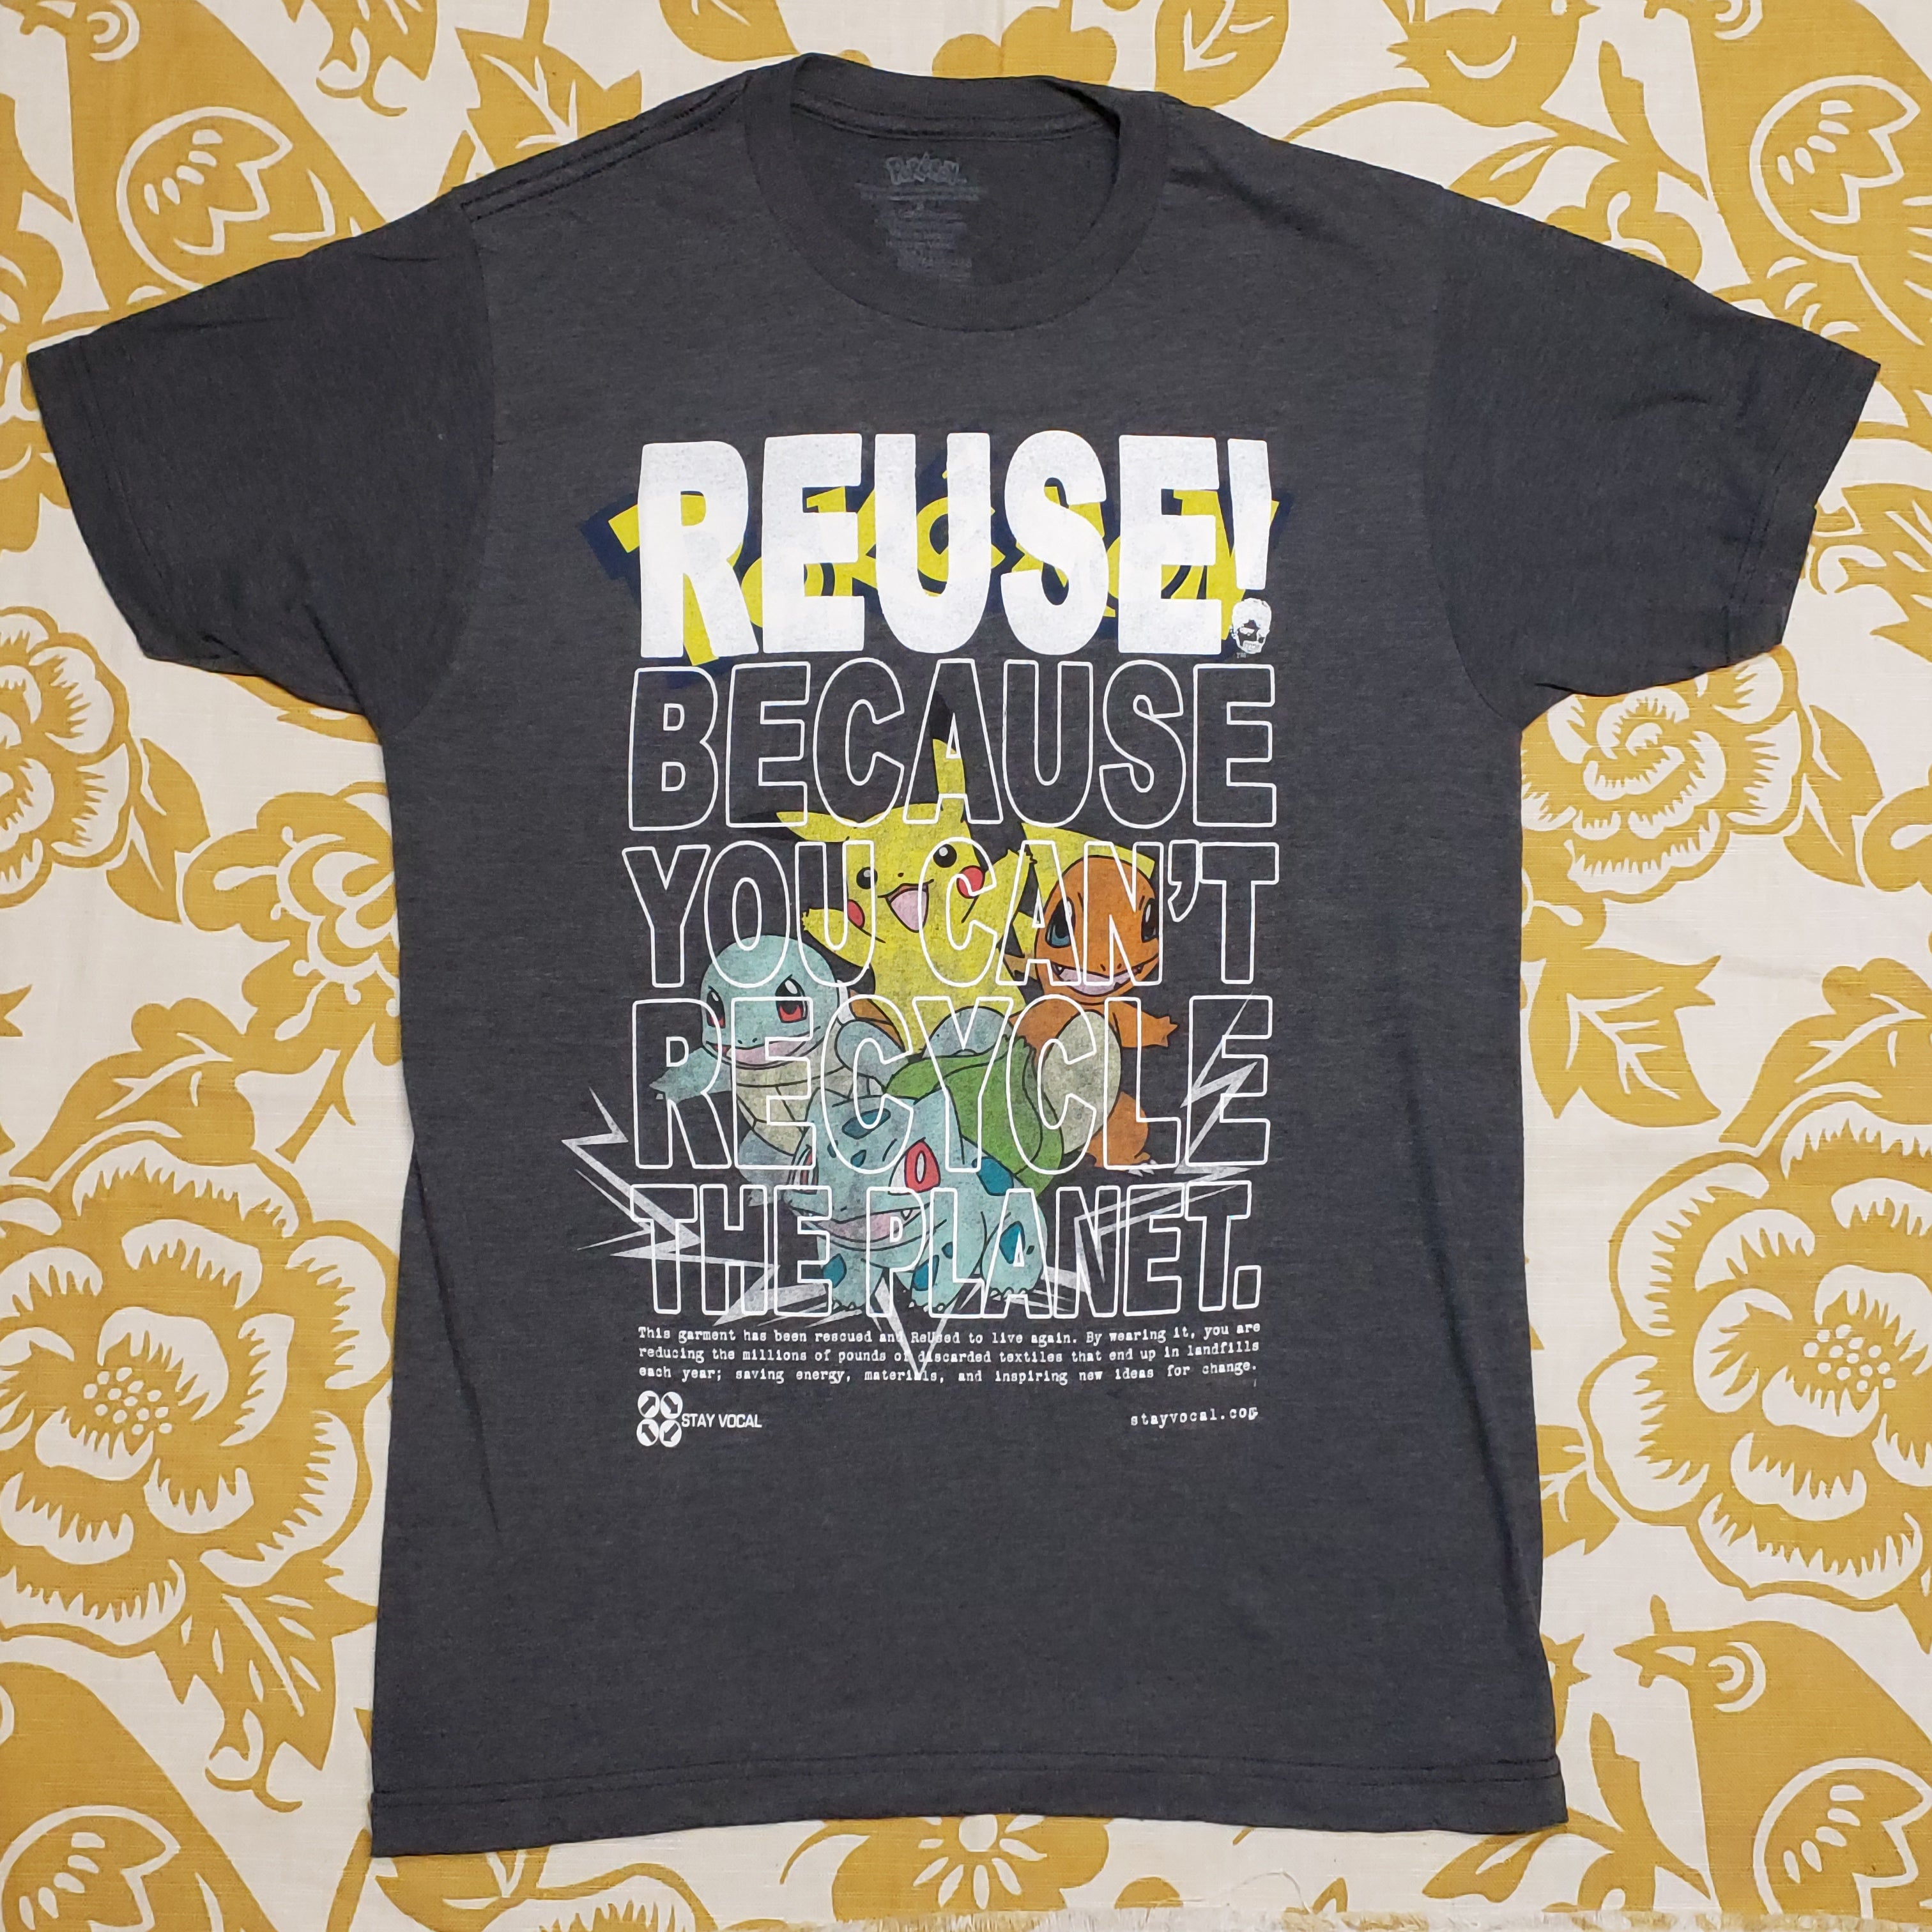 One of a Kind (Men's S) REUSE! Pokémon - Blastoise, Charmander, Pikachu and Squirtle T-Shirt